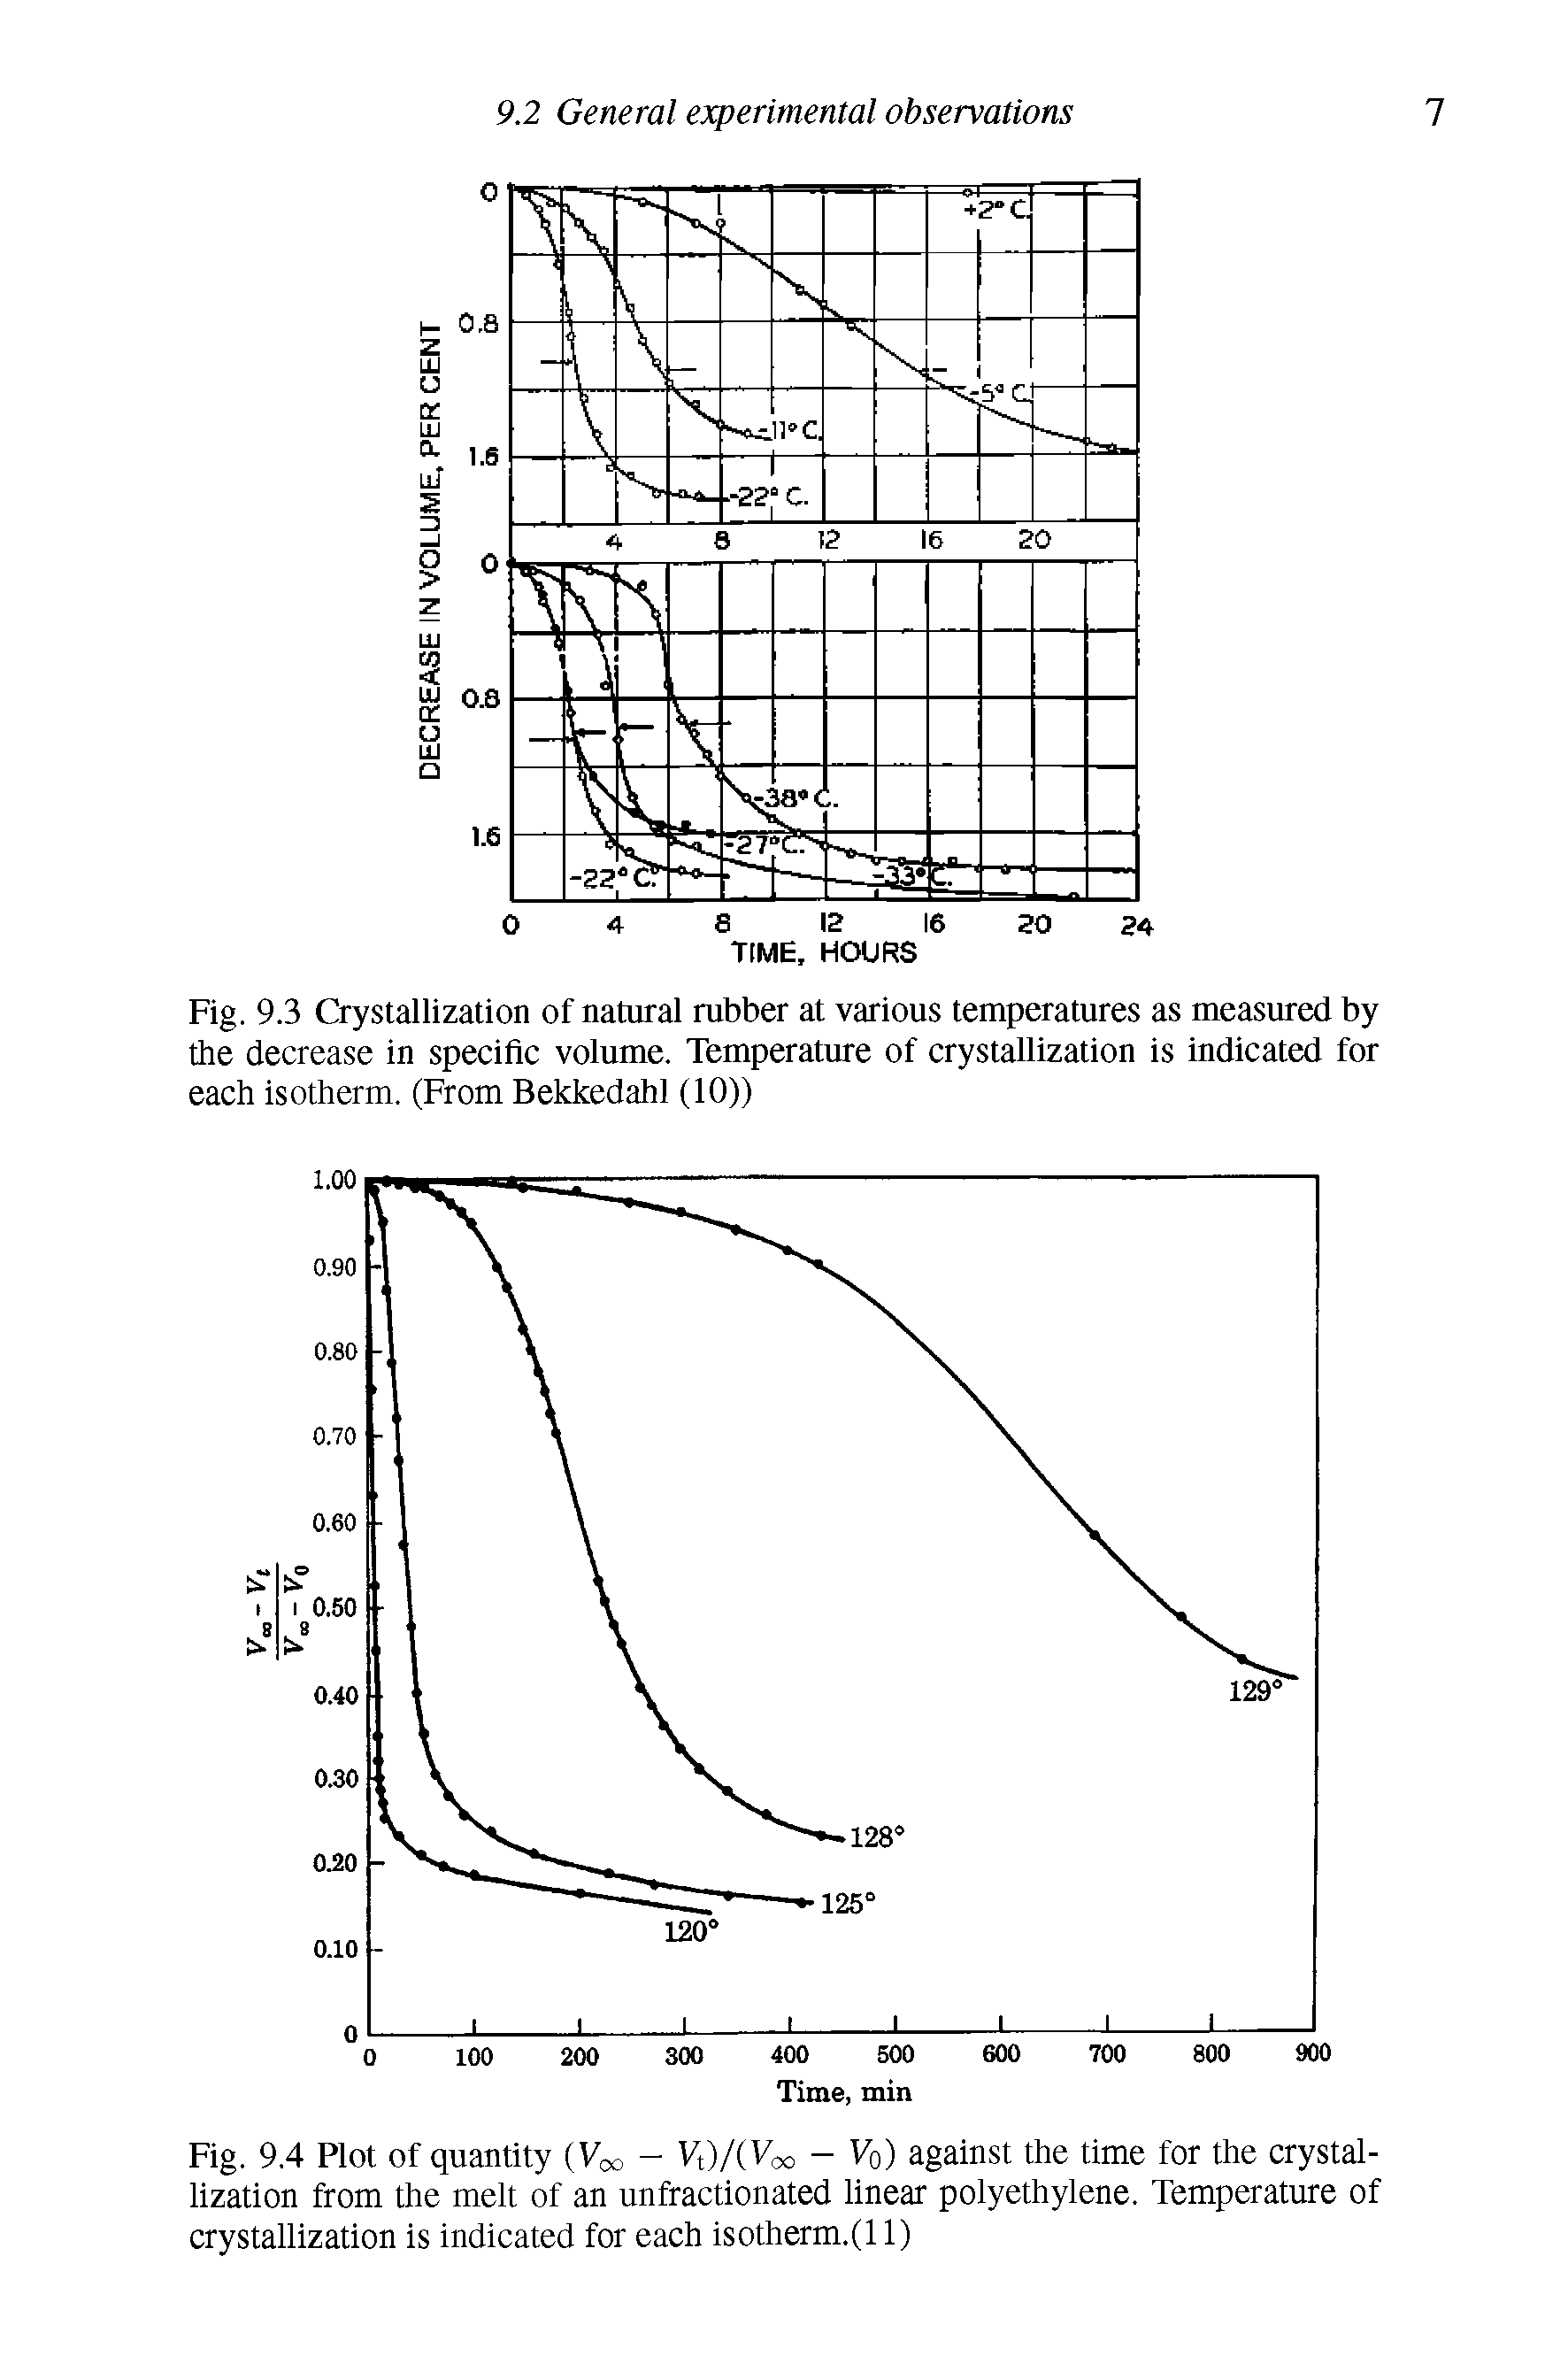 Fig. 9.4 Plot of quantity (Voo - Vt)/(Voo - Vb) against the time for the crystallization from the melt of an unfractionated linear polyethylene. Temperature of crystallization is indicated for each isotherm.(ll)...